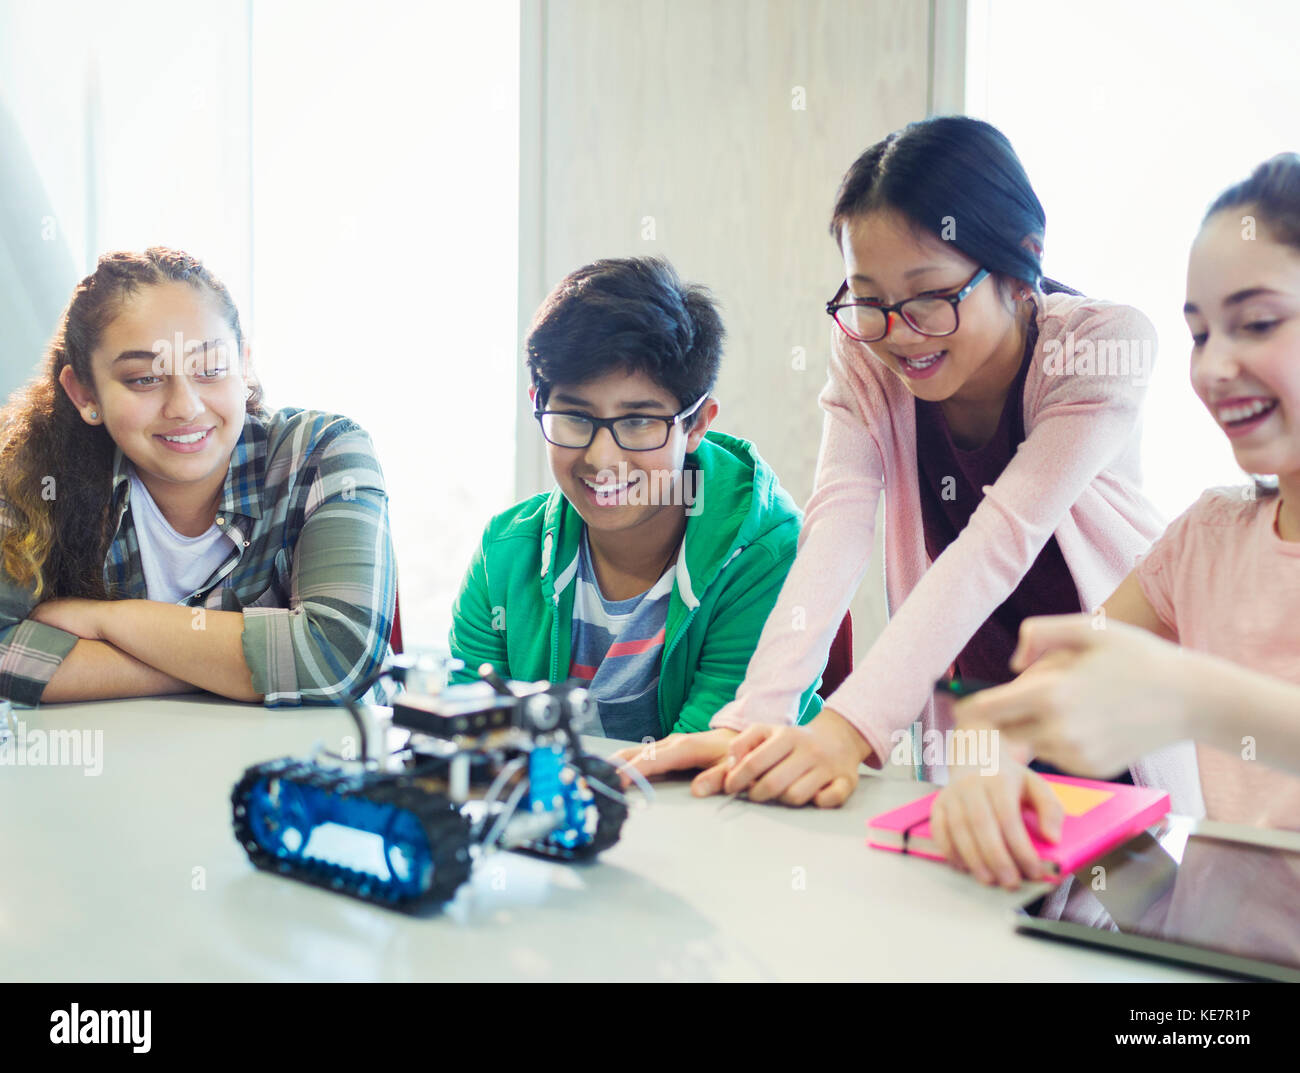 Students programming and testing robotics in classroom Stock Photo